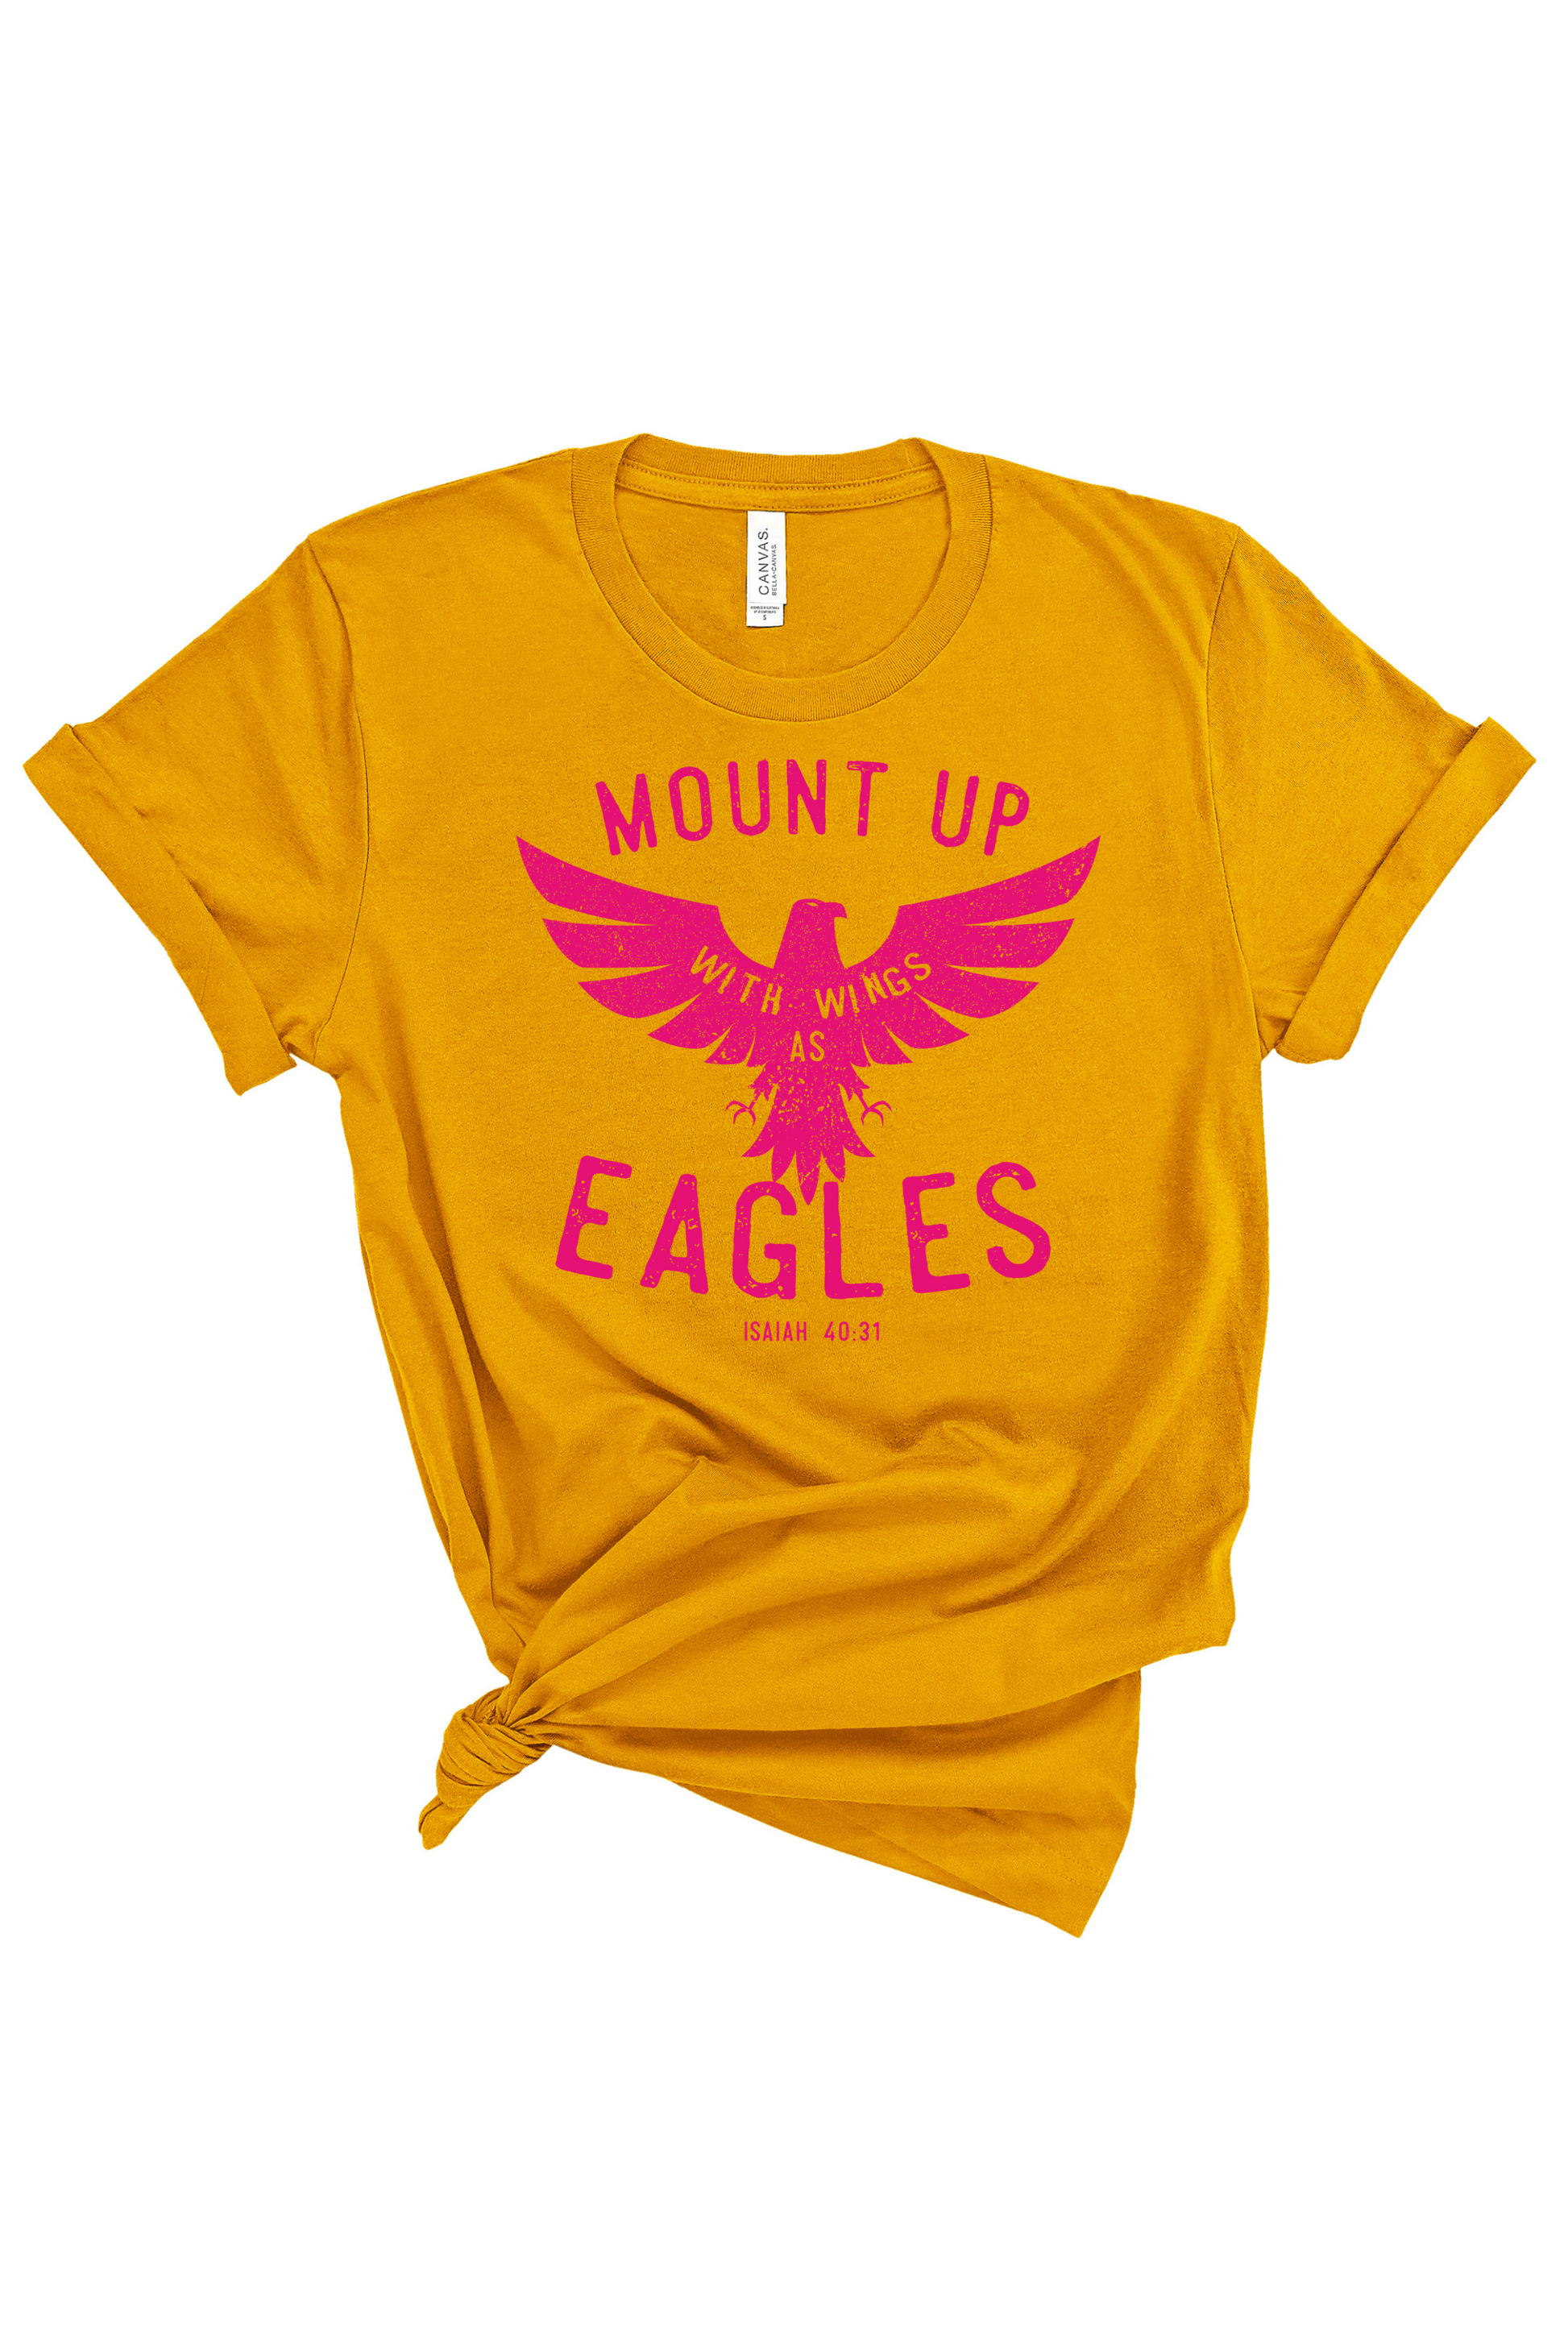 Wings Like Eagles | Adult Tee-Sister Shirts-Sister Shirts, Cute & Custom Tees for Mama & Littles in Trussville, Alabama.